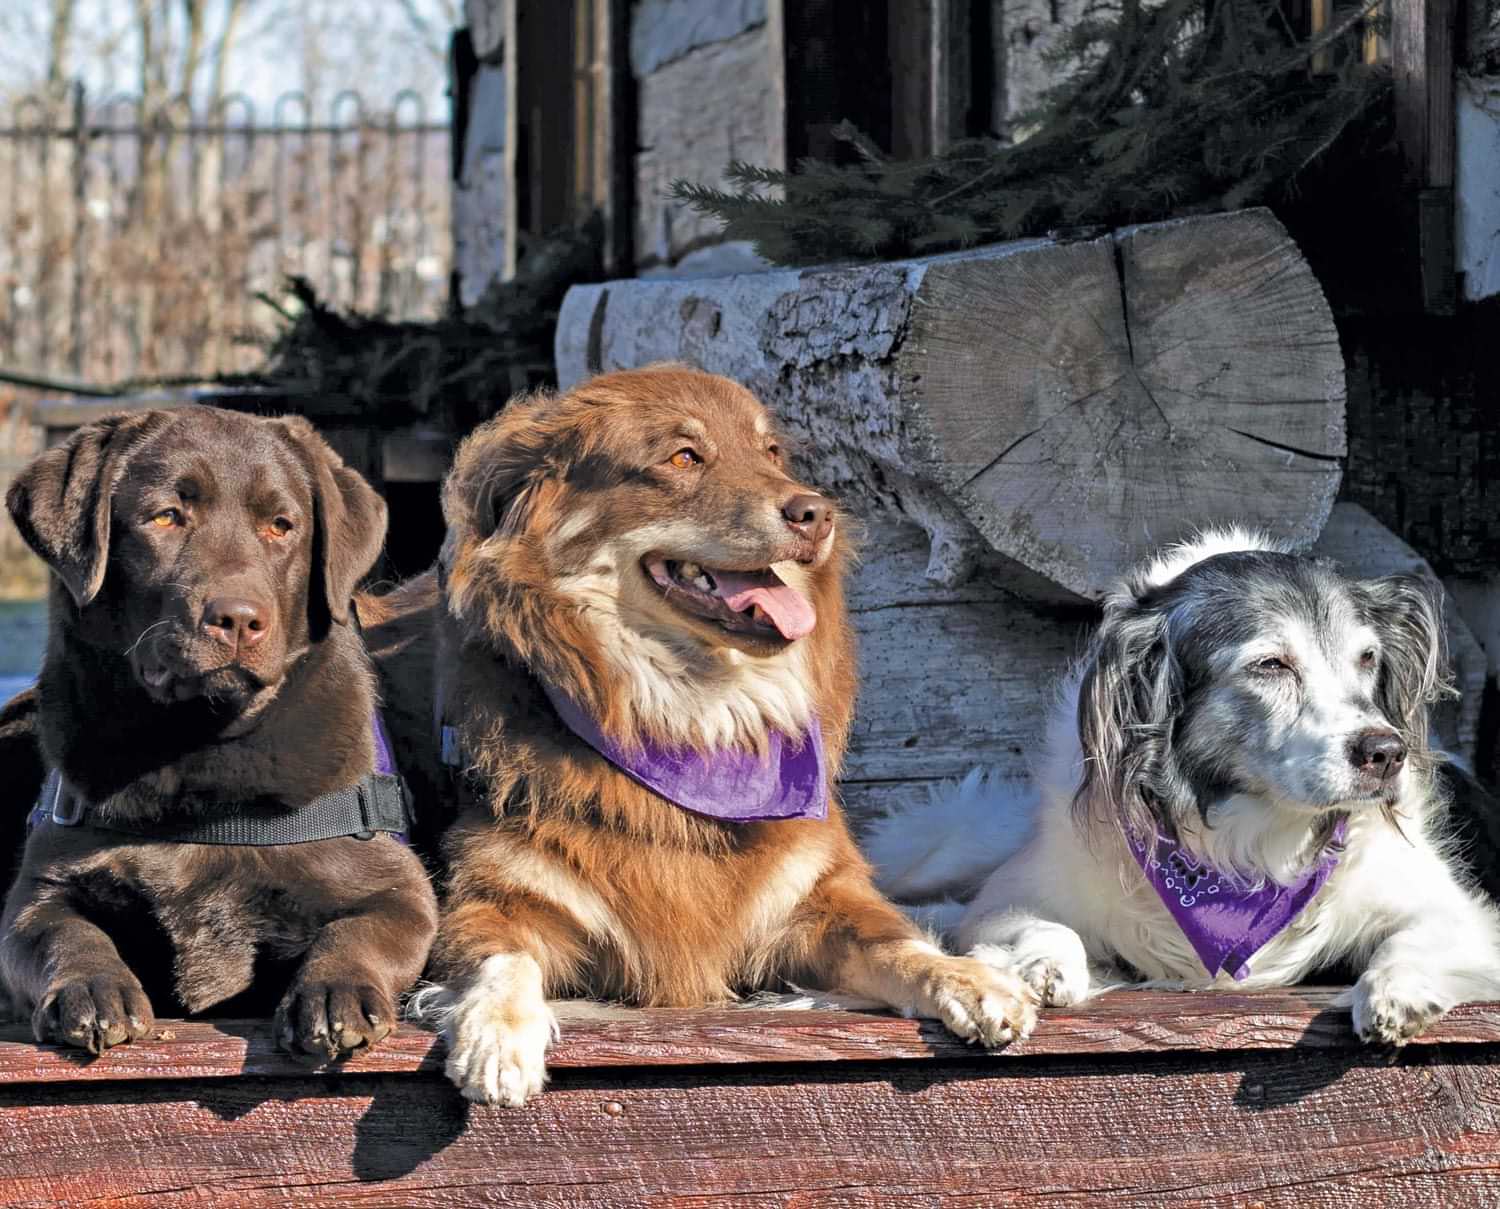 three large breed dogs wearing purple scarfs lay side by side